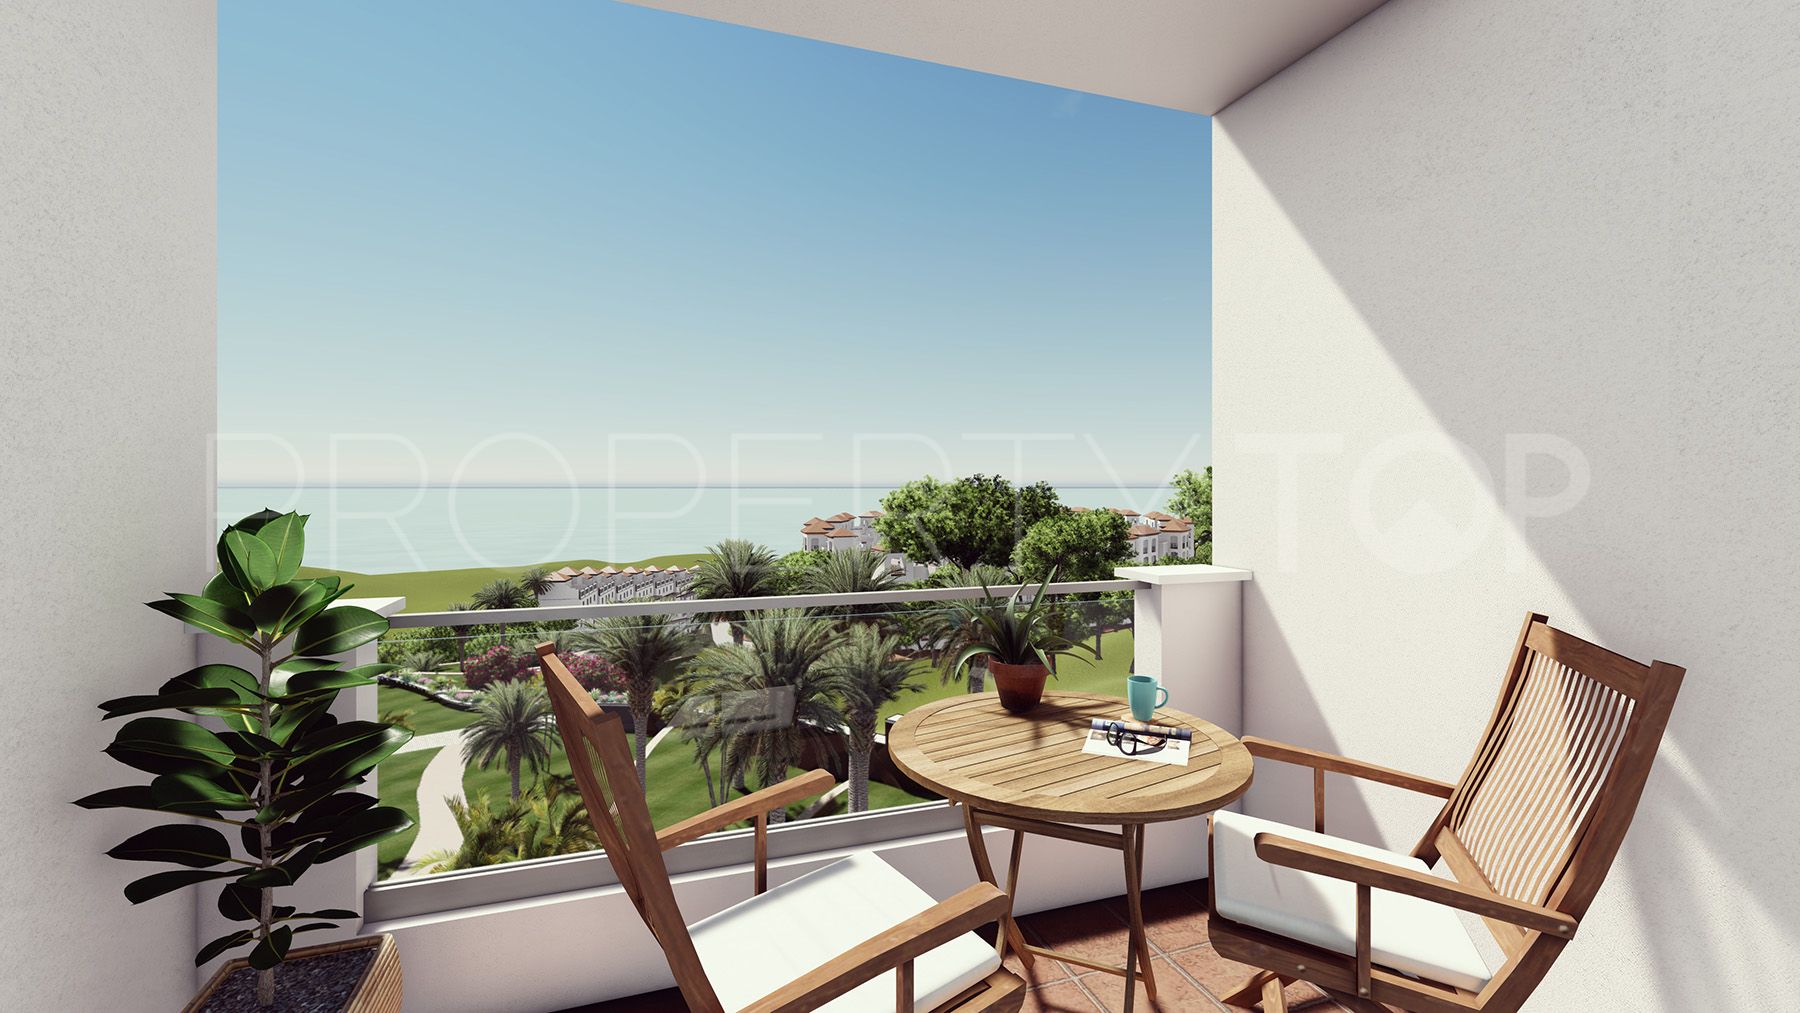 Ground floor apartment with 2 bedrooms for sale in Manilva